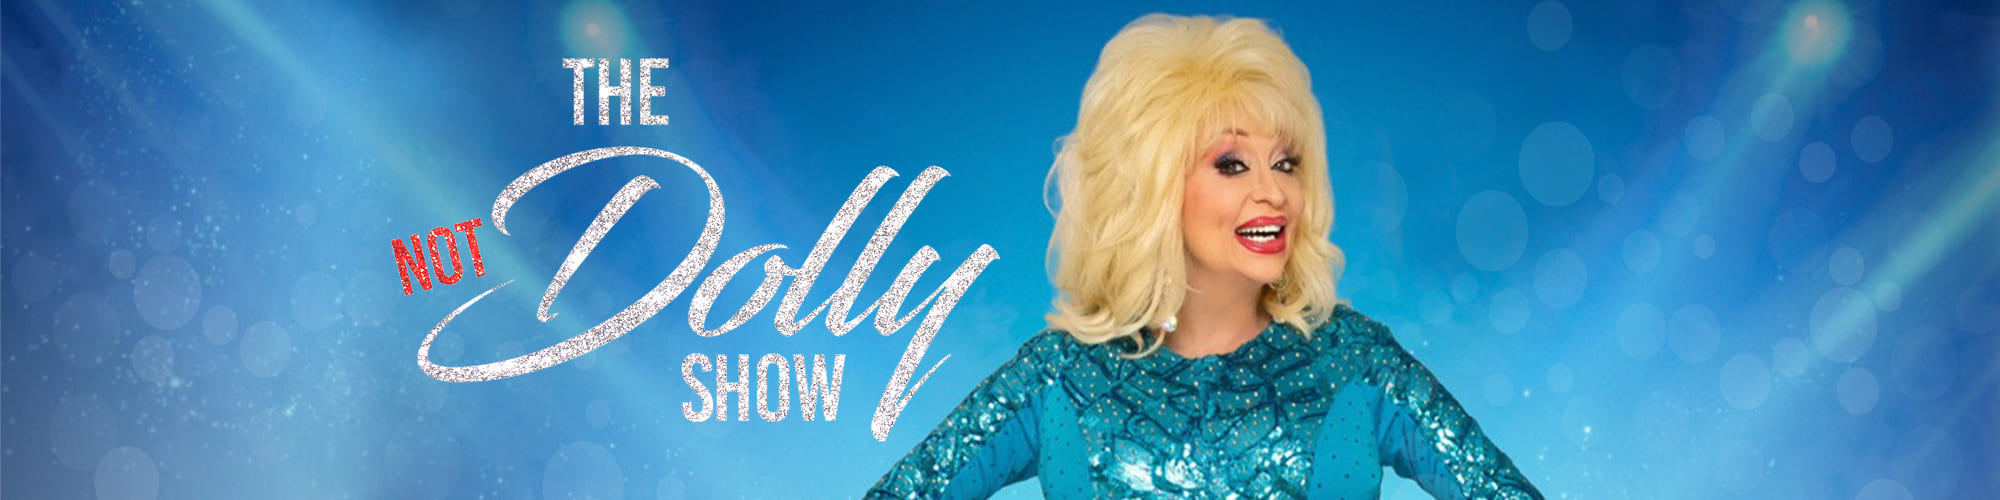 The Not Dolly Show